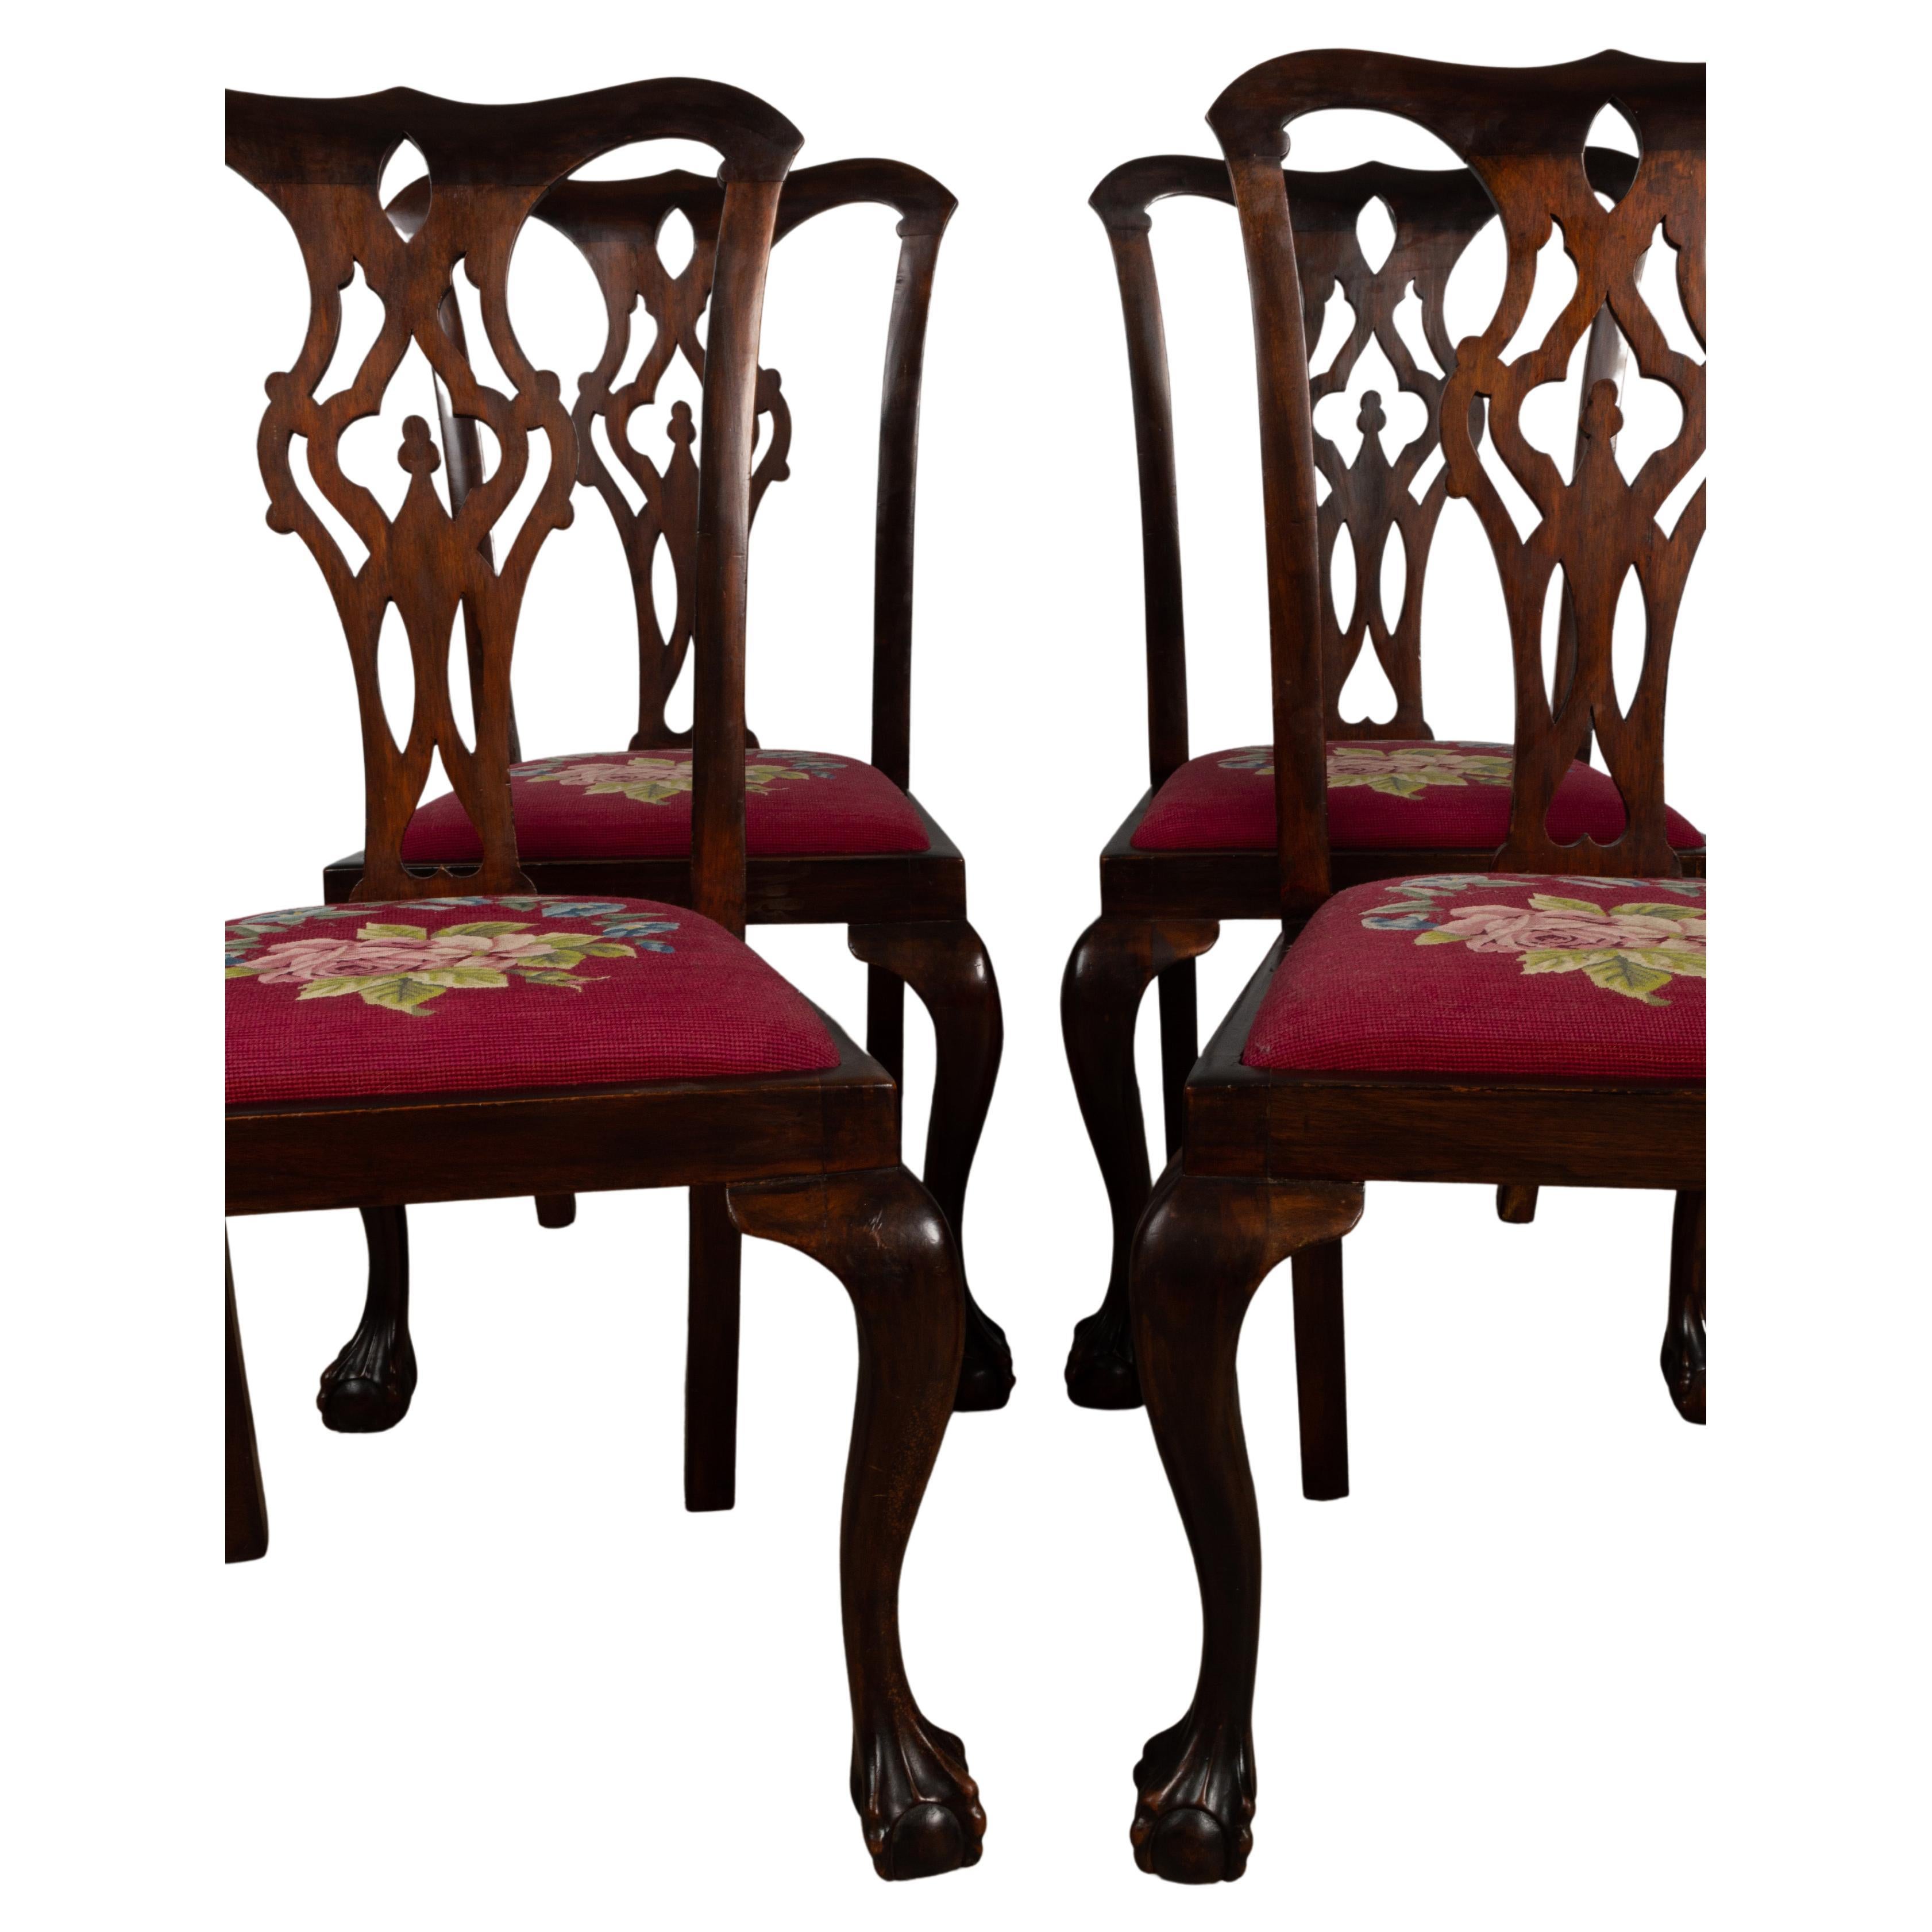 4 Antique English 19th Century Chippendale Revival Mahogany Chairs In Good Condition For Sale In London, GB